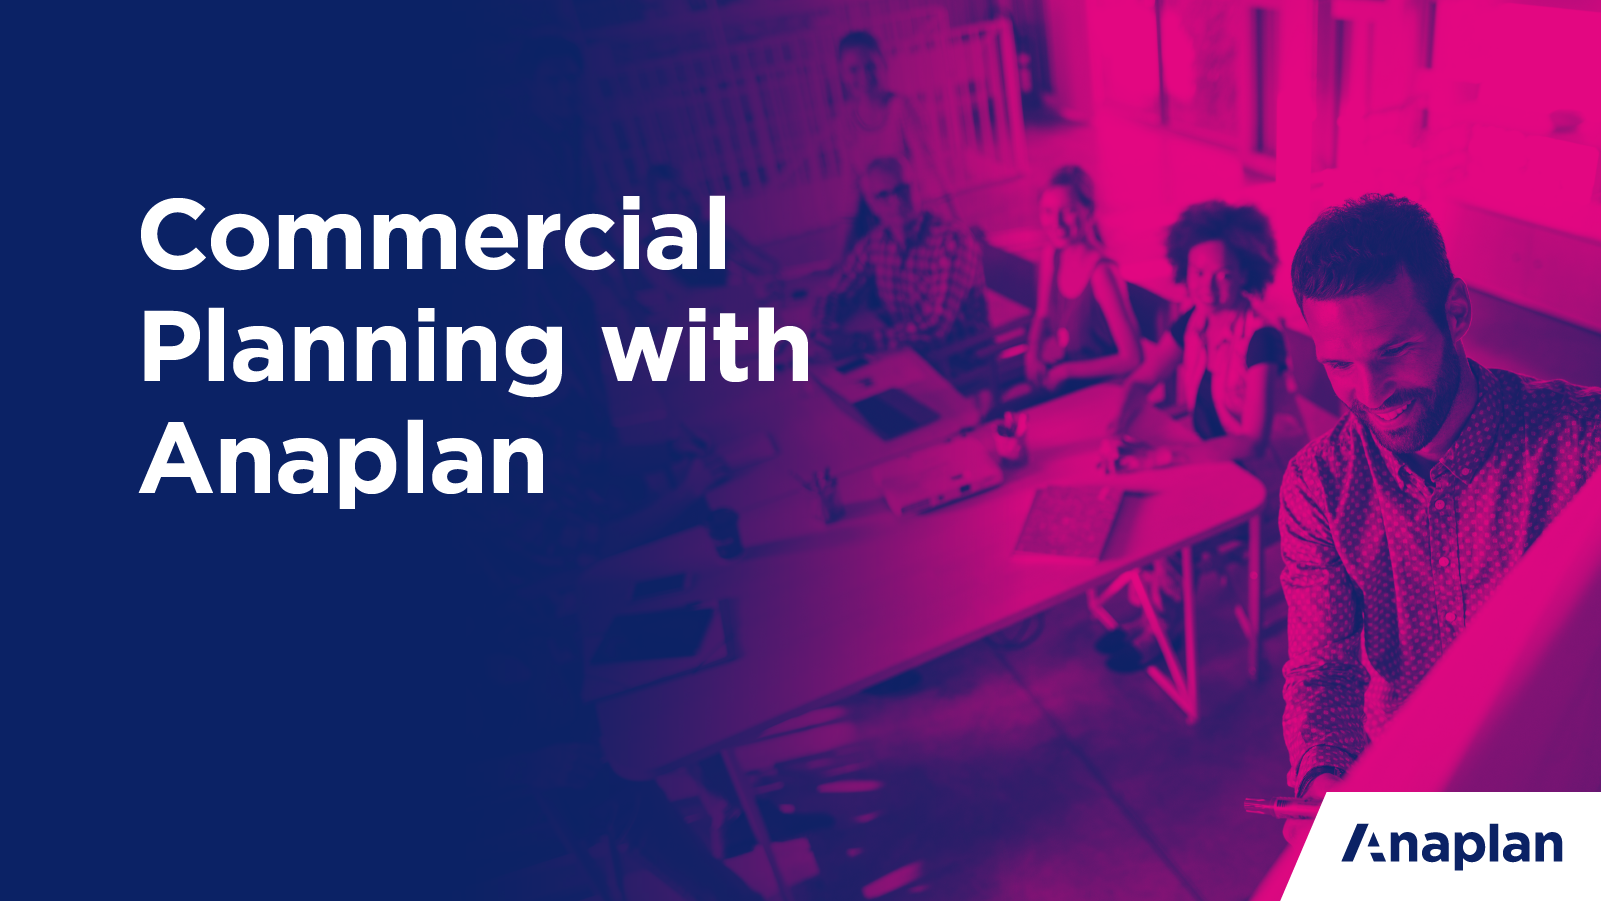 Commercial planning with Anaplan